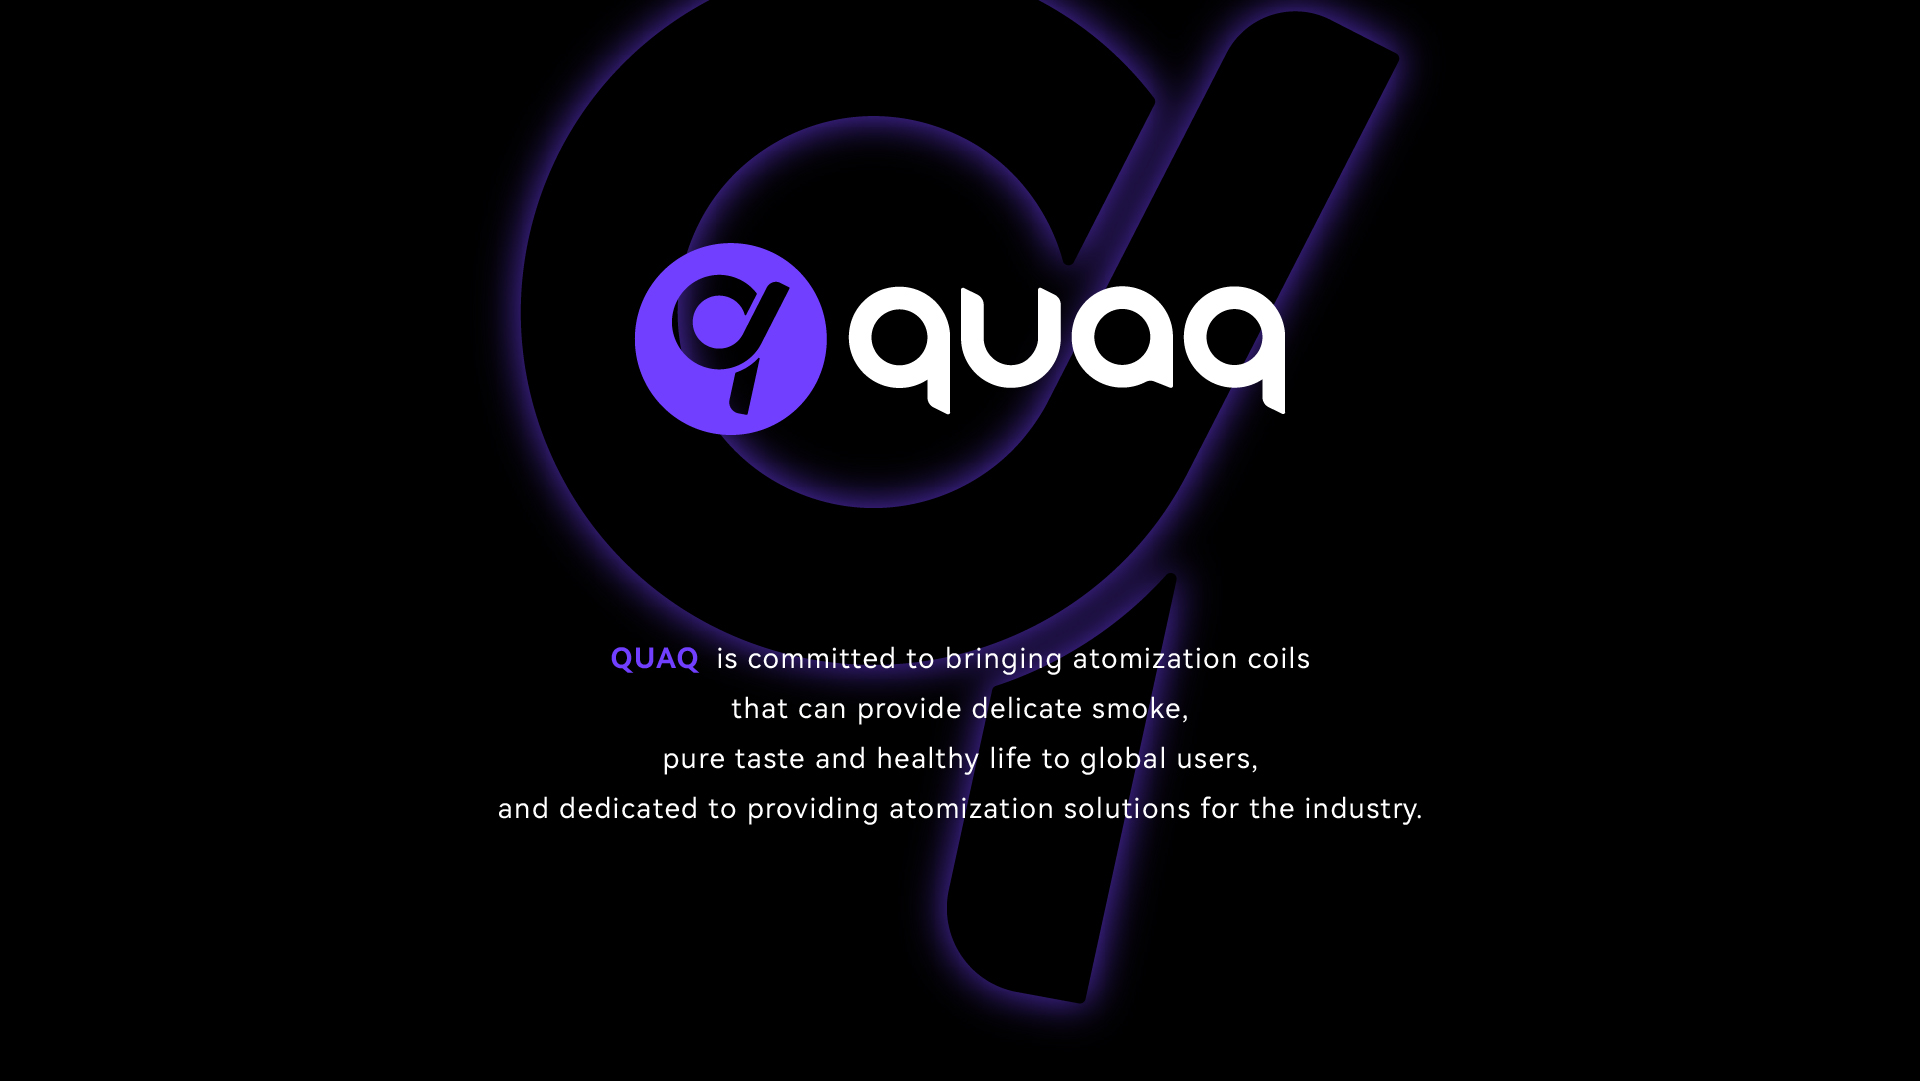 QUAK is committed to bringing atomization coils that can provide delicate smoke, pure taste and healthy life for global users, and dedicated to providing atomization solutions for the industry.